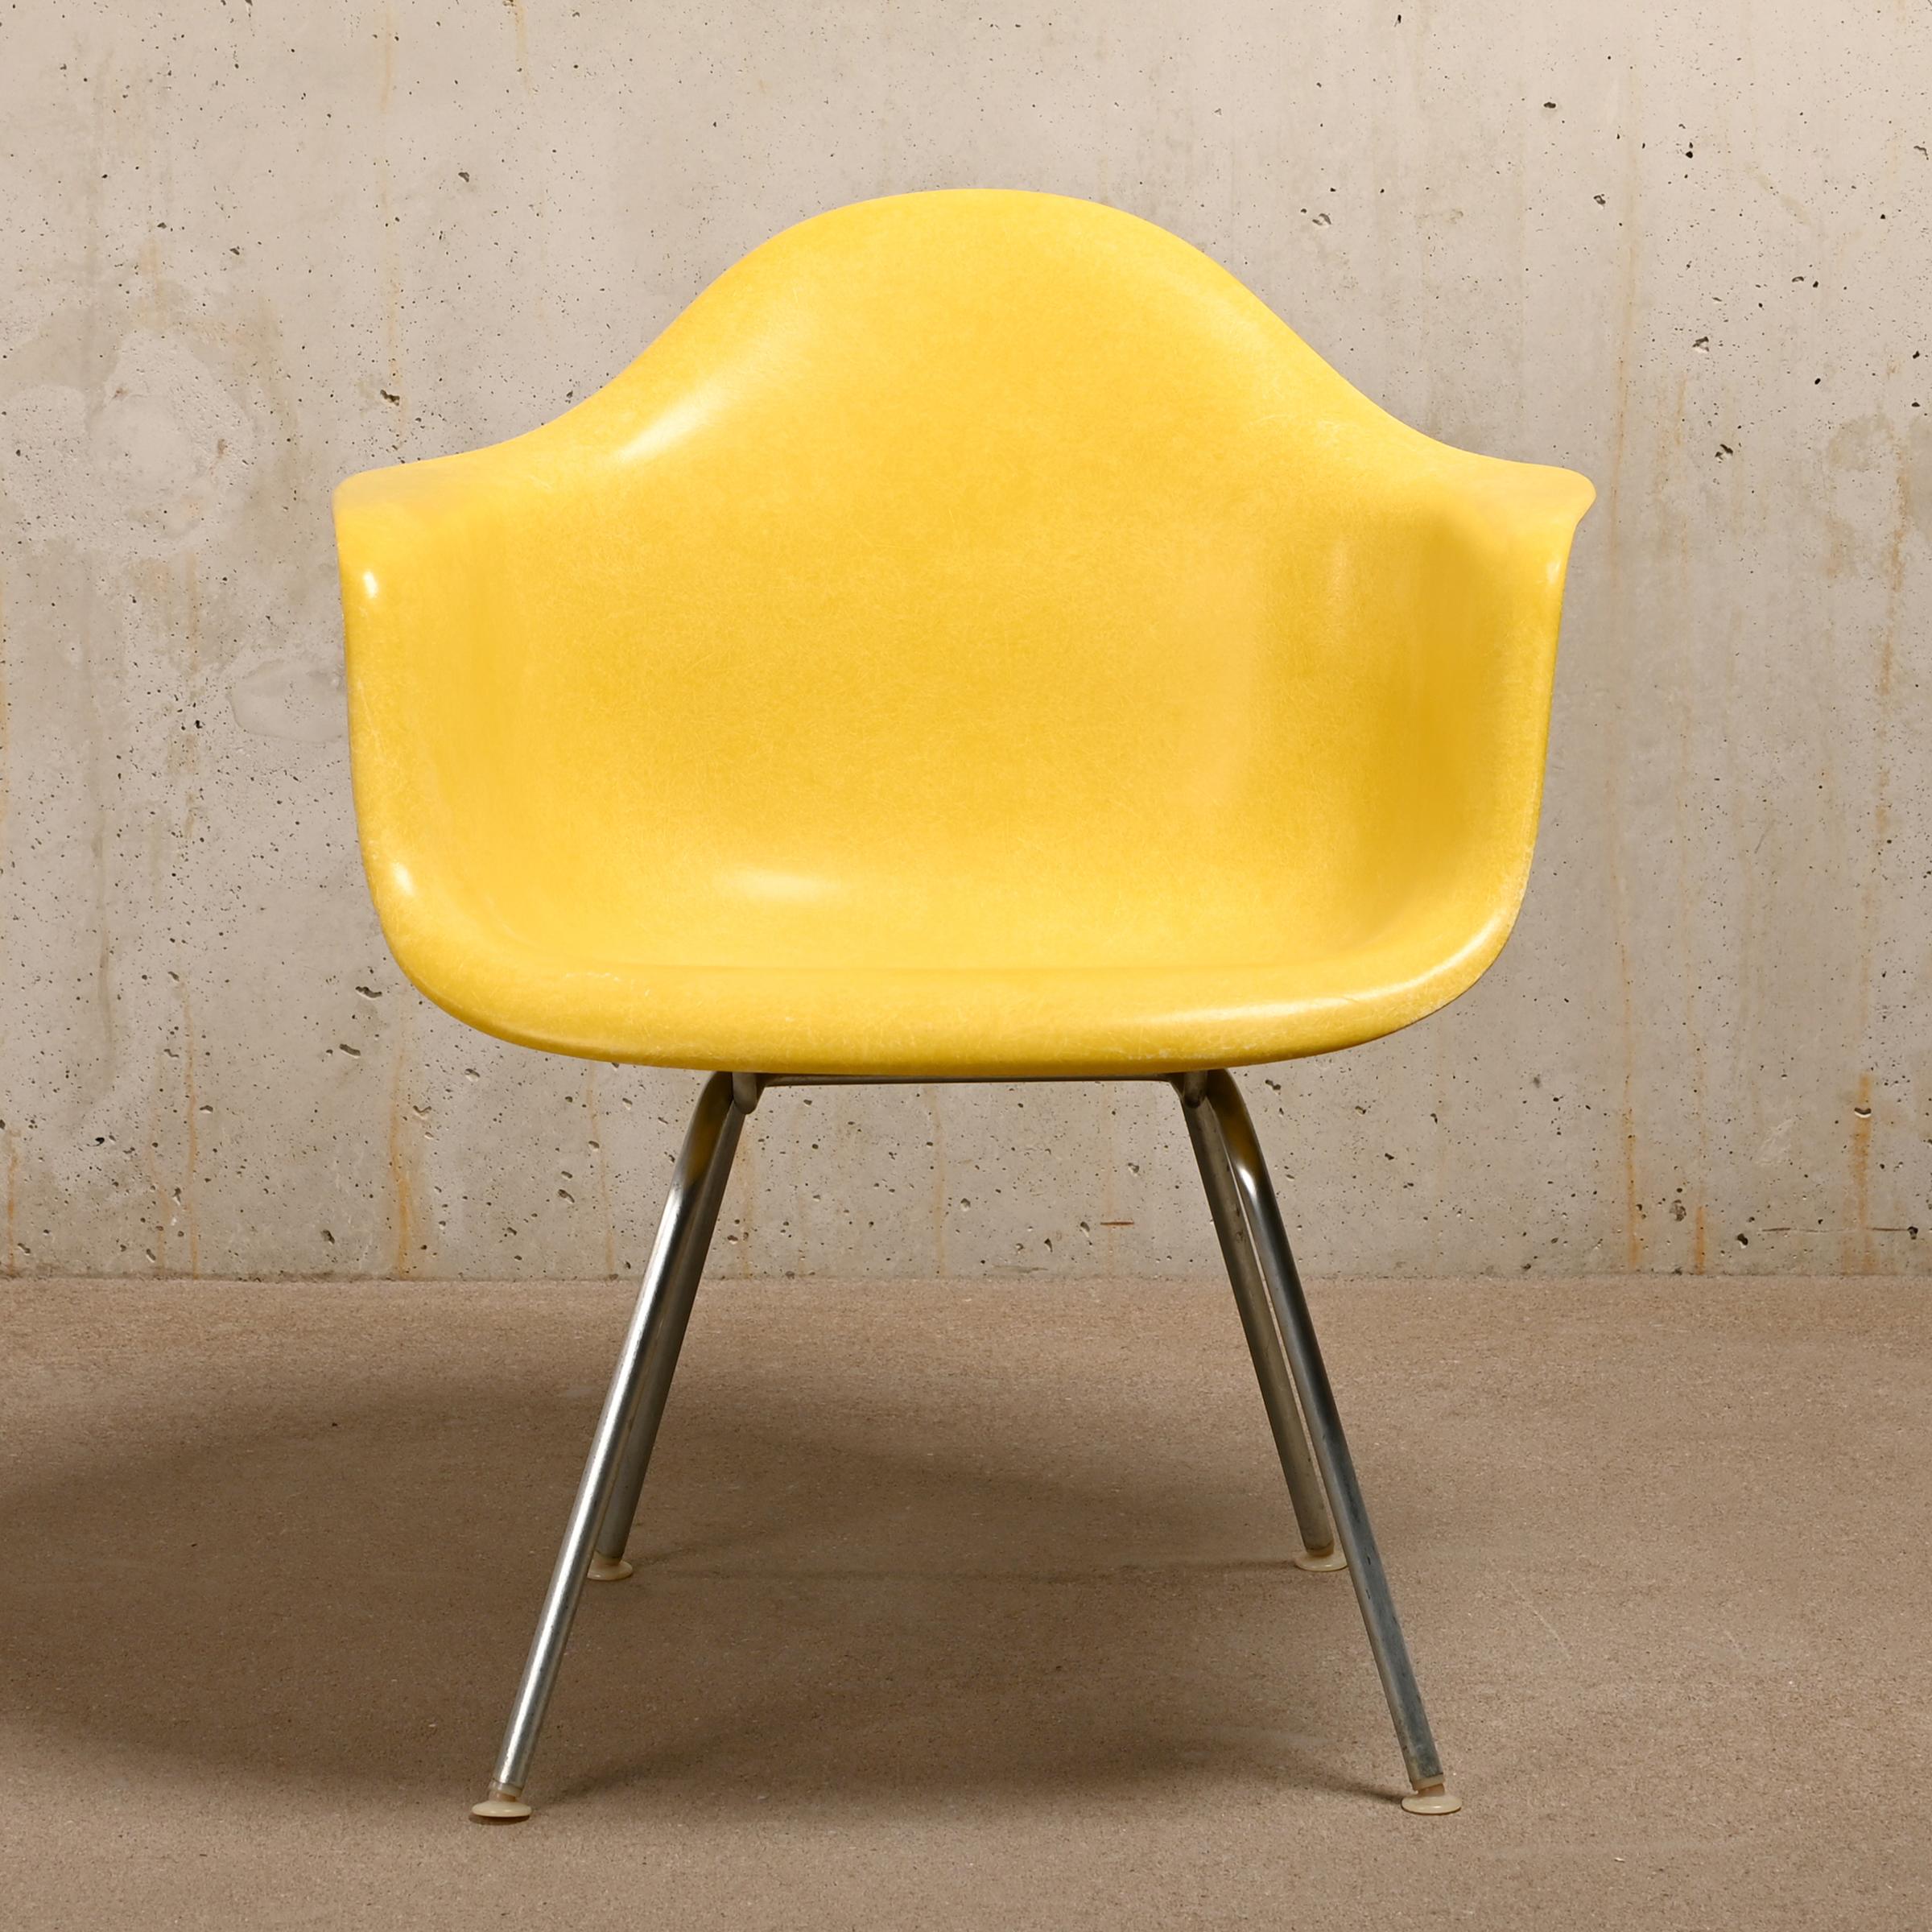 Iconic armchair designed by Charles and Ray Eames for Herman Miller. Molded fiberglass shell in Canary Yellow and assembled on a medium height zinc plated steel H-base (MAX). The chair is in good vintage condition with small signs of wear. The shock